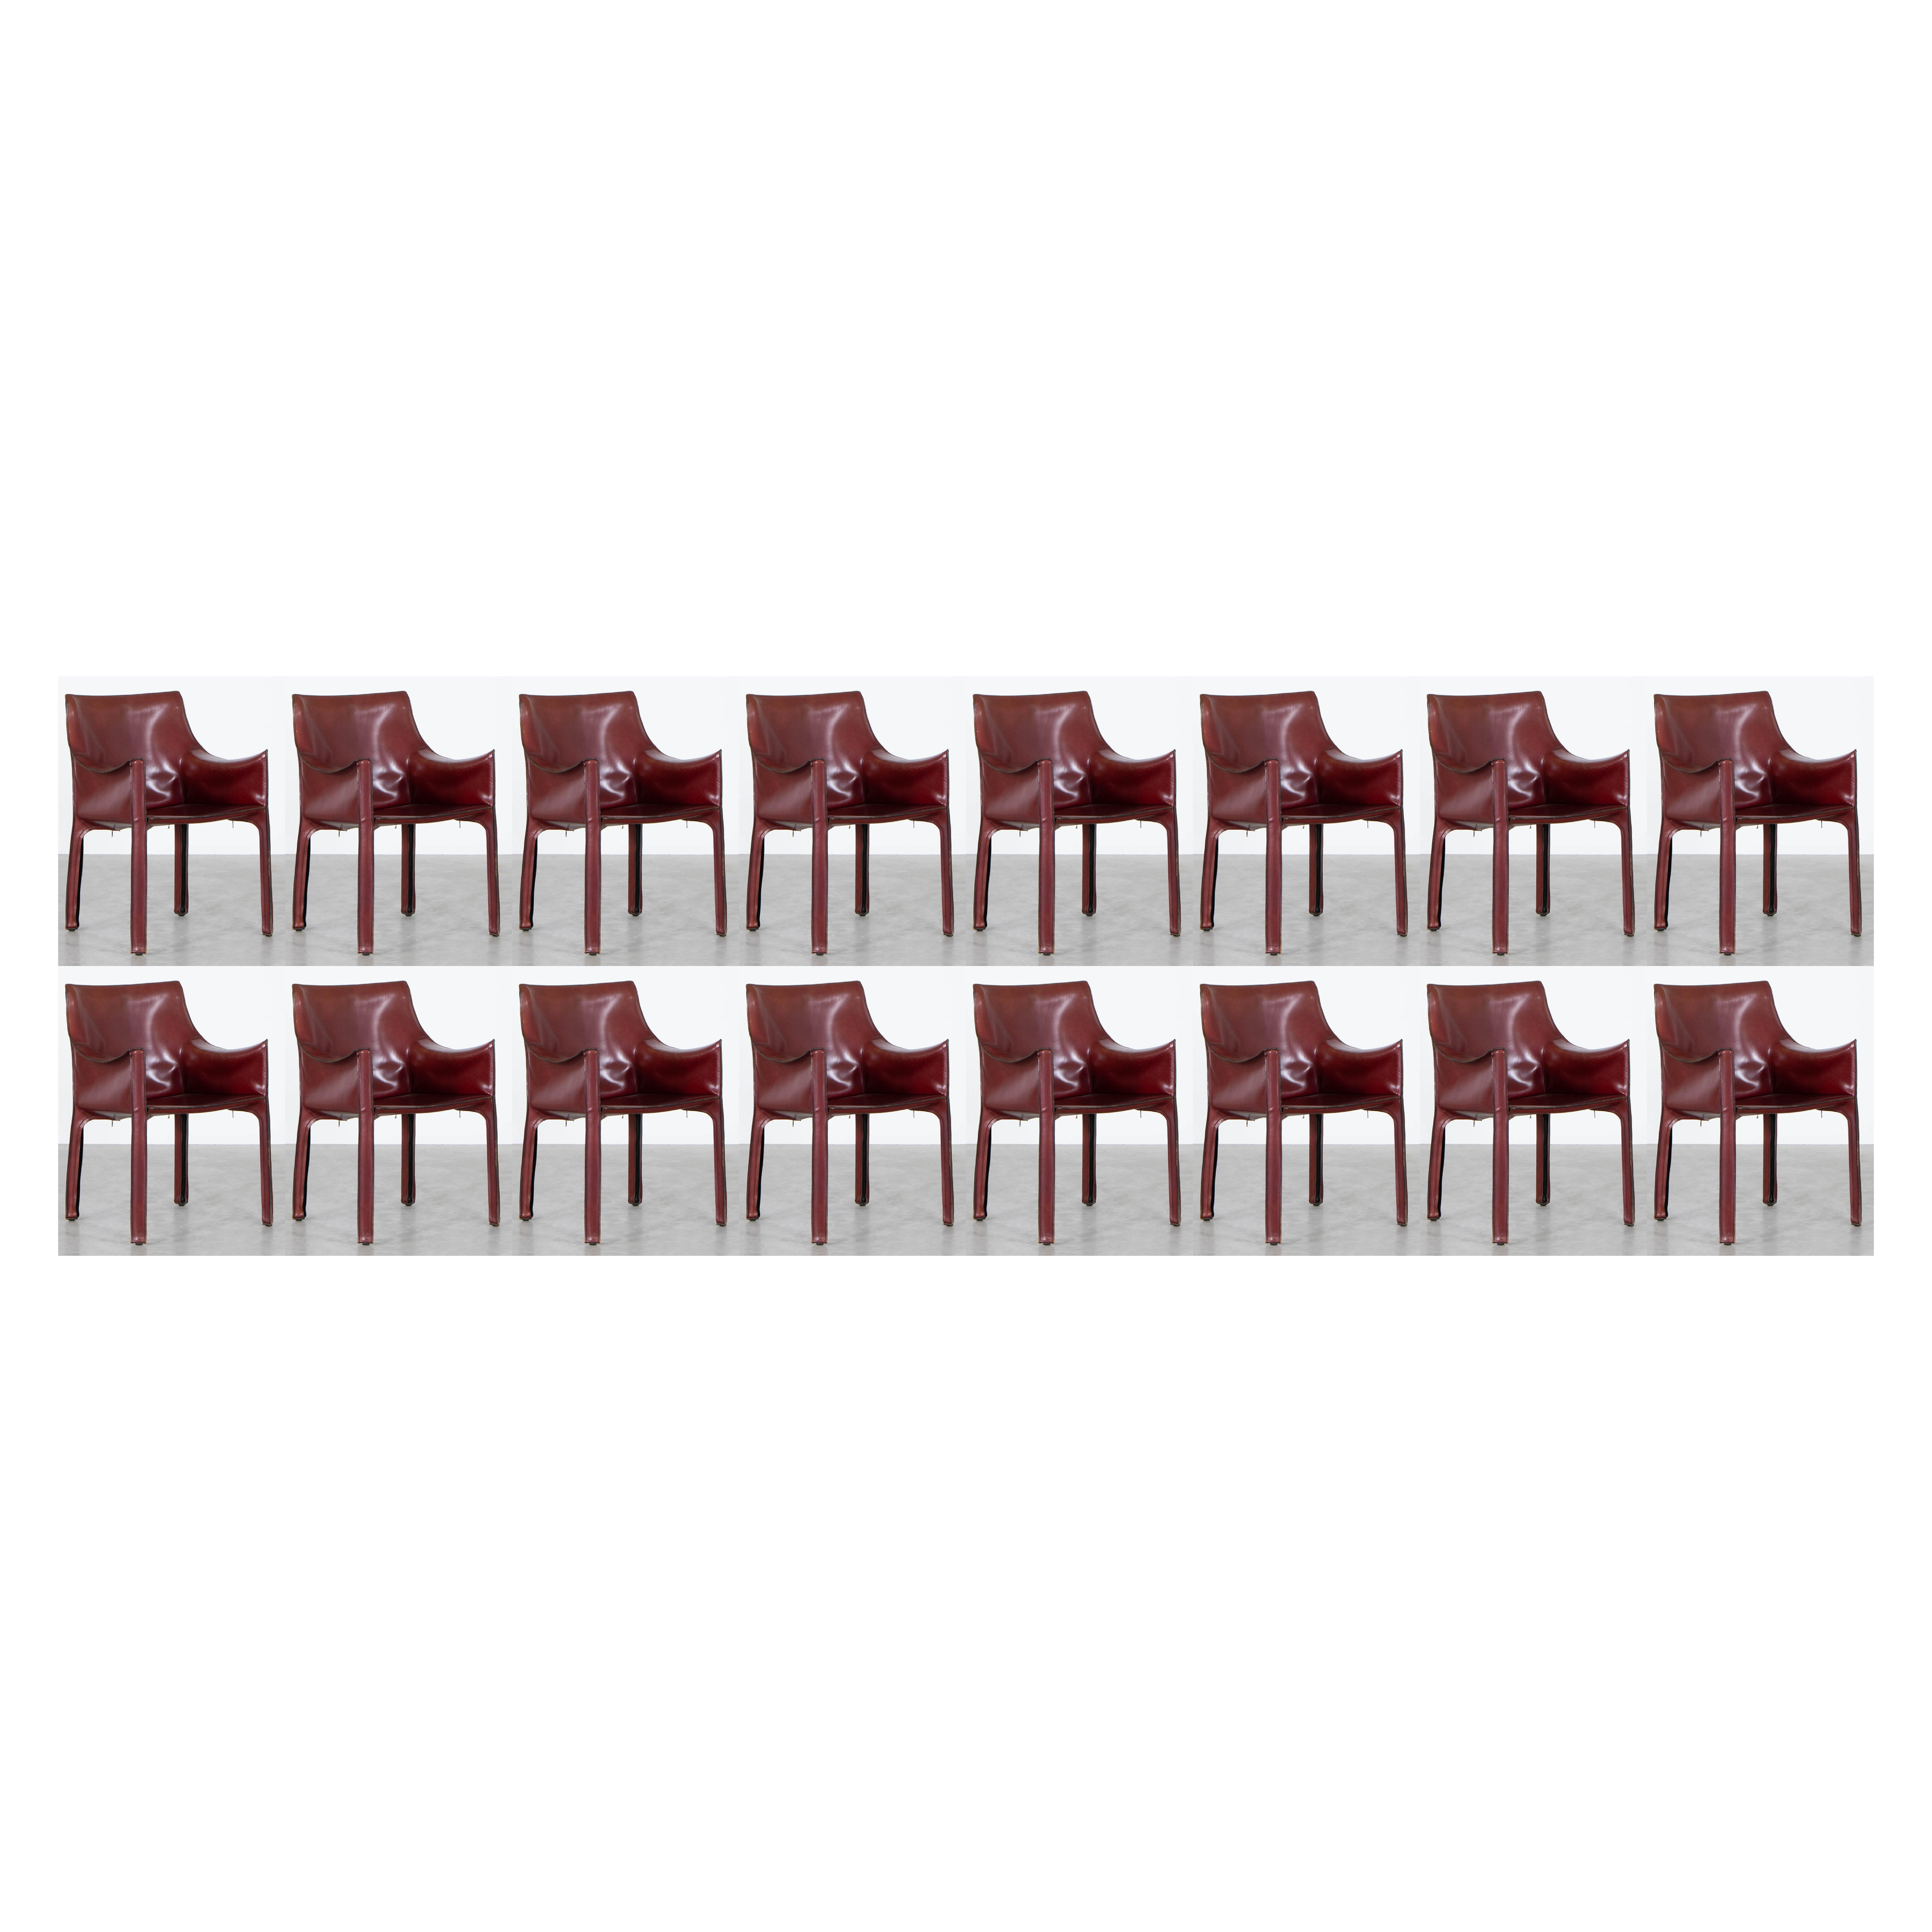 Mario Bellini "CAB 413" Chairs for Cassina in Bordeaux, 1977, Set of 16 For Sale